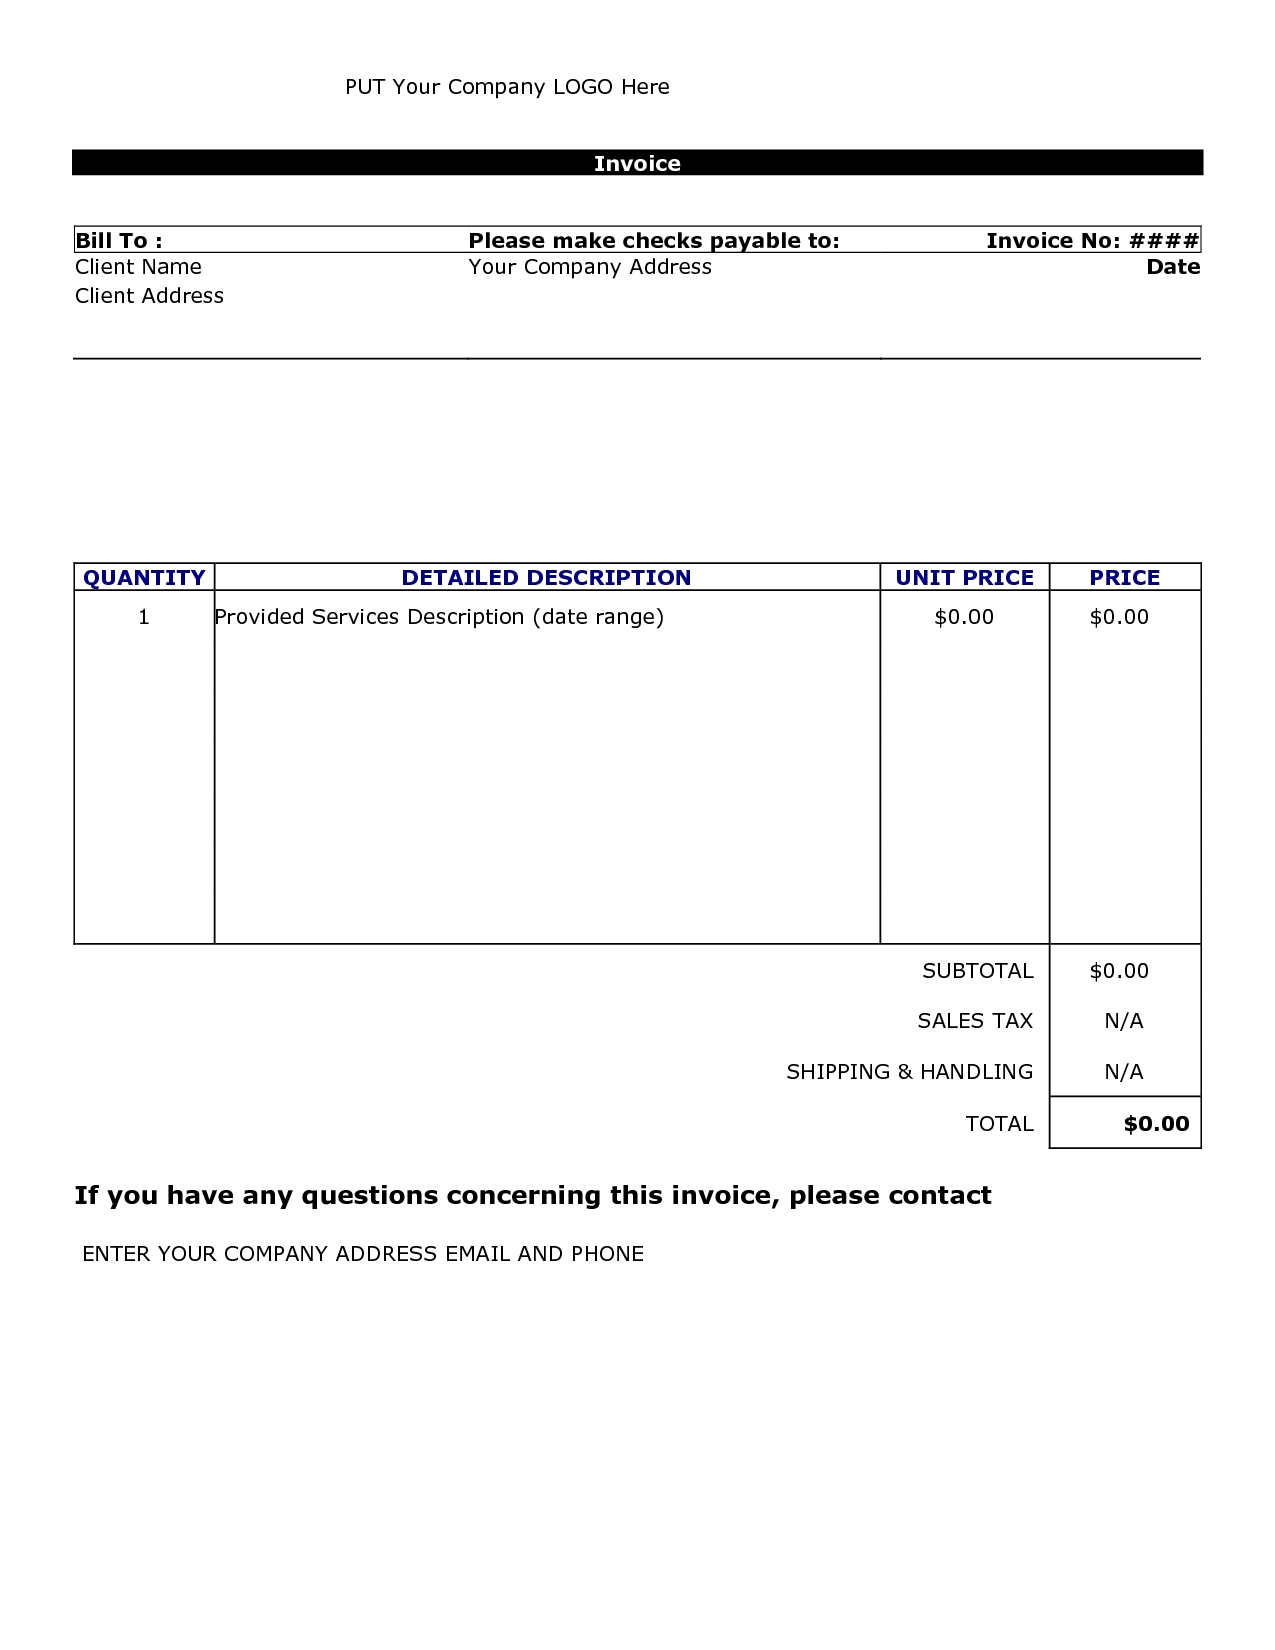 Invoice Template Word 2010